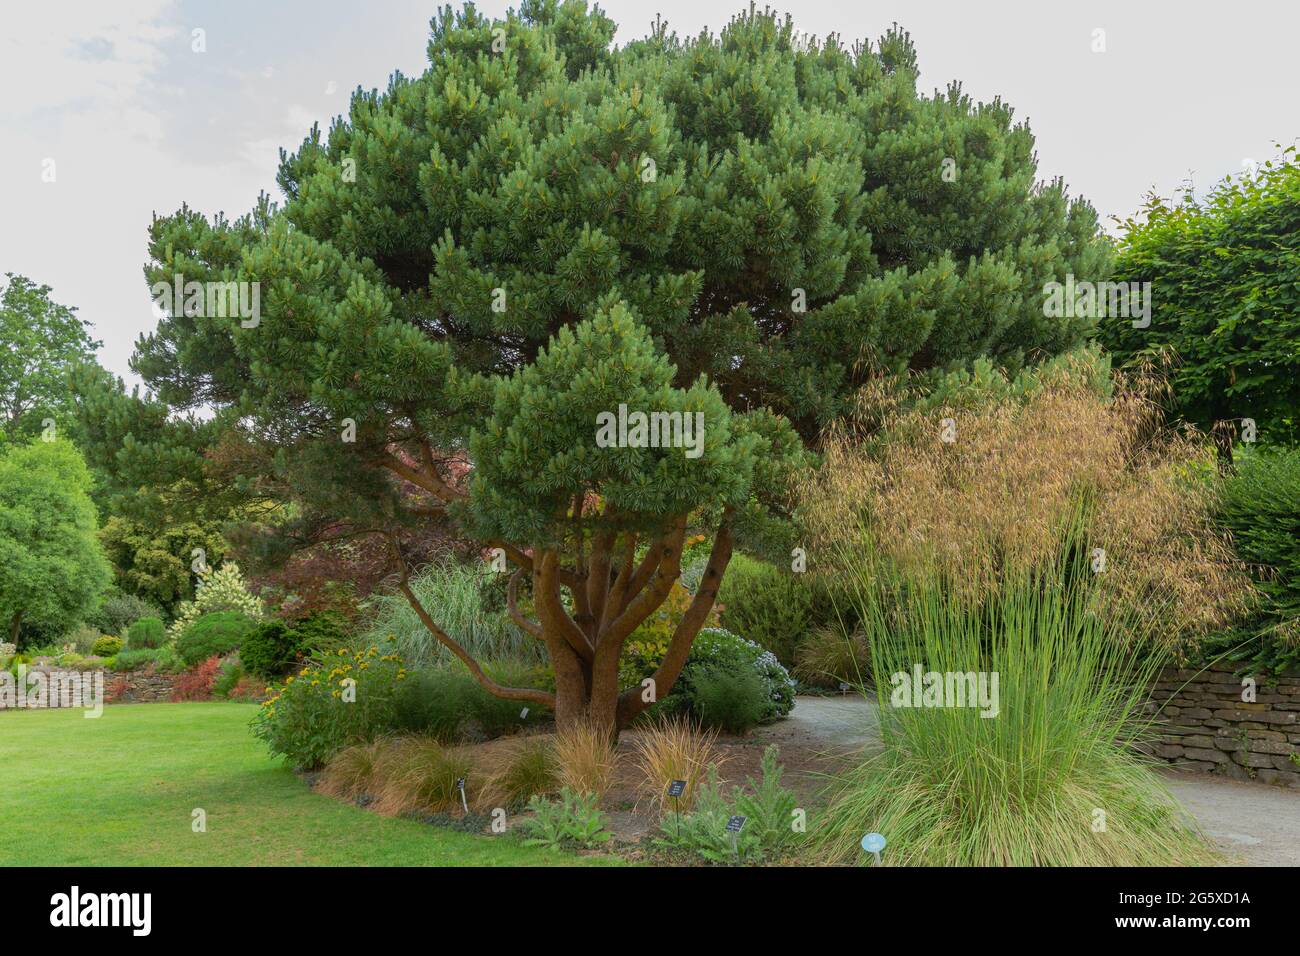 Pinus sylvestris the scots or european red pine, a species of pine in the pinaceae family Stock Photo